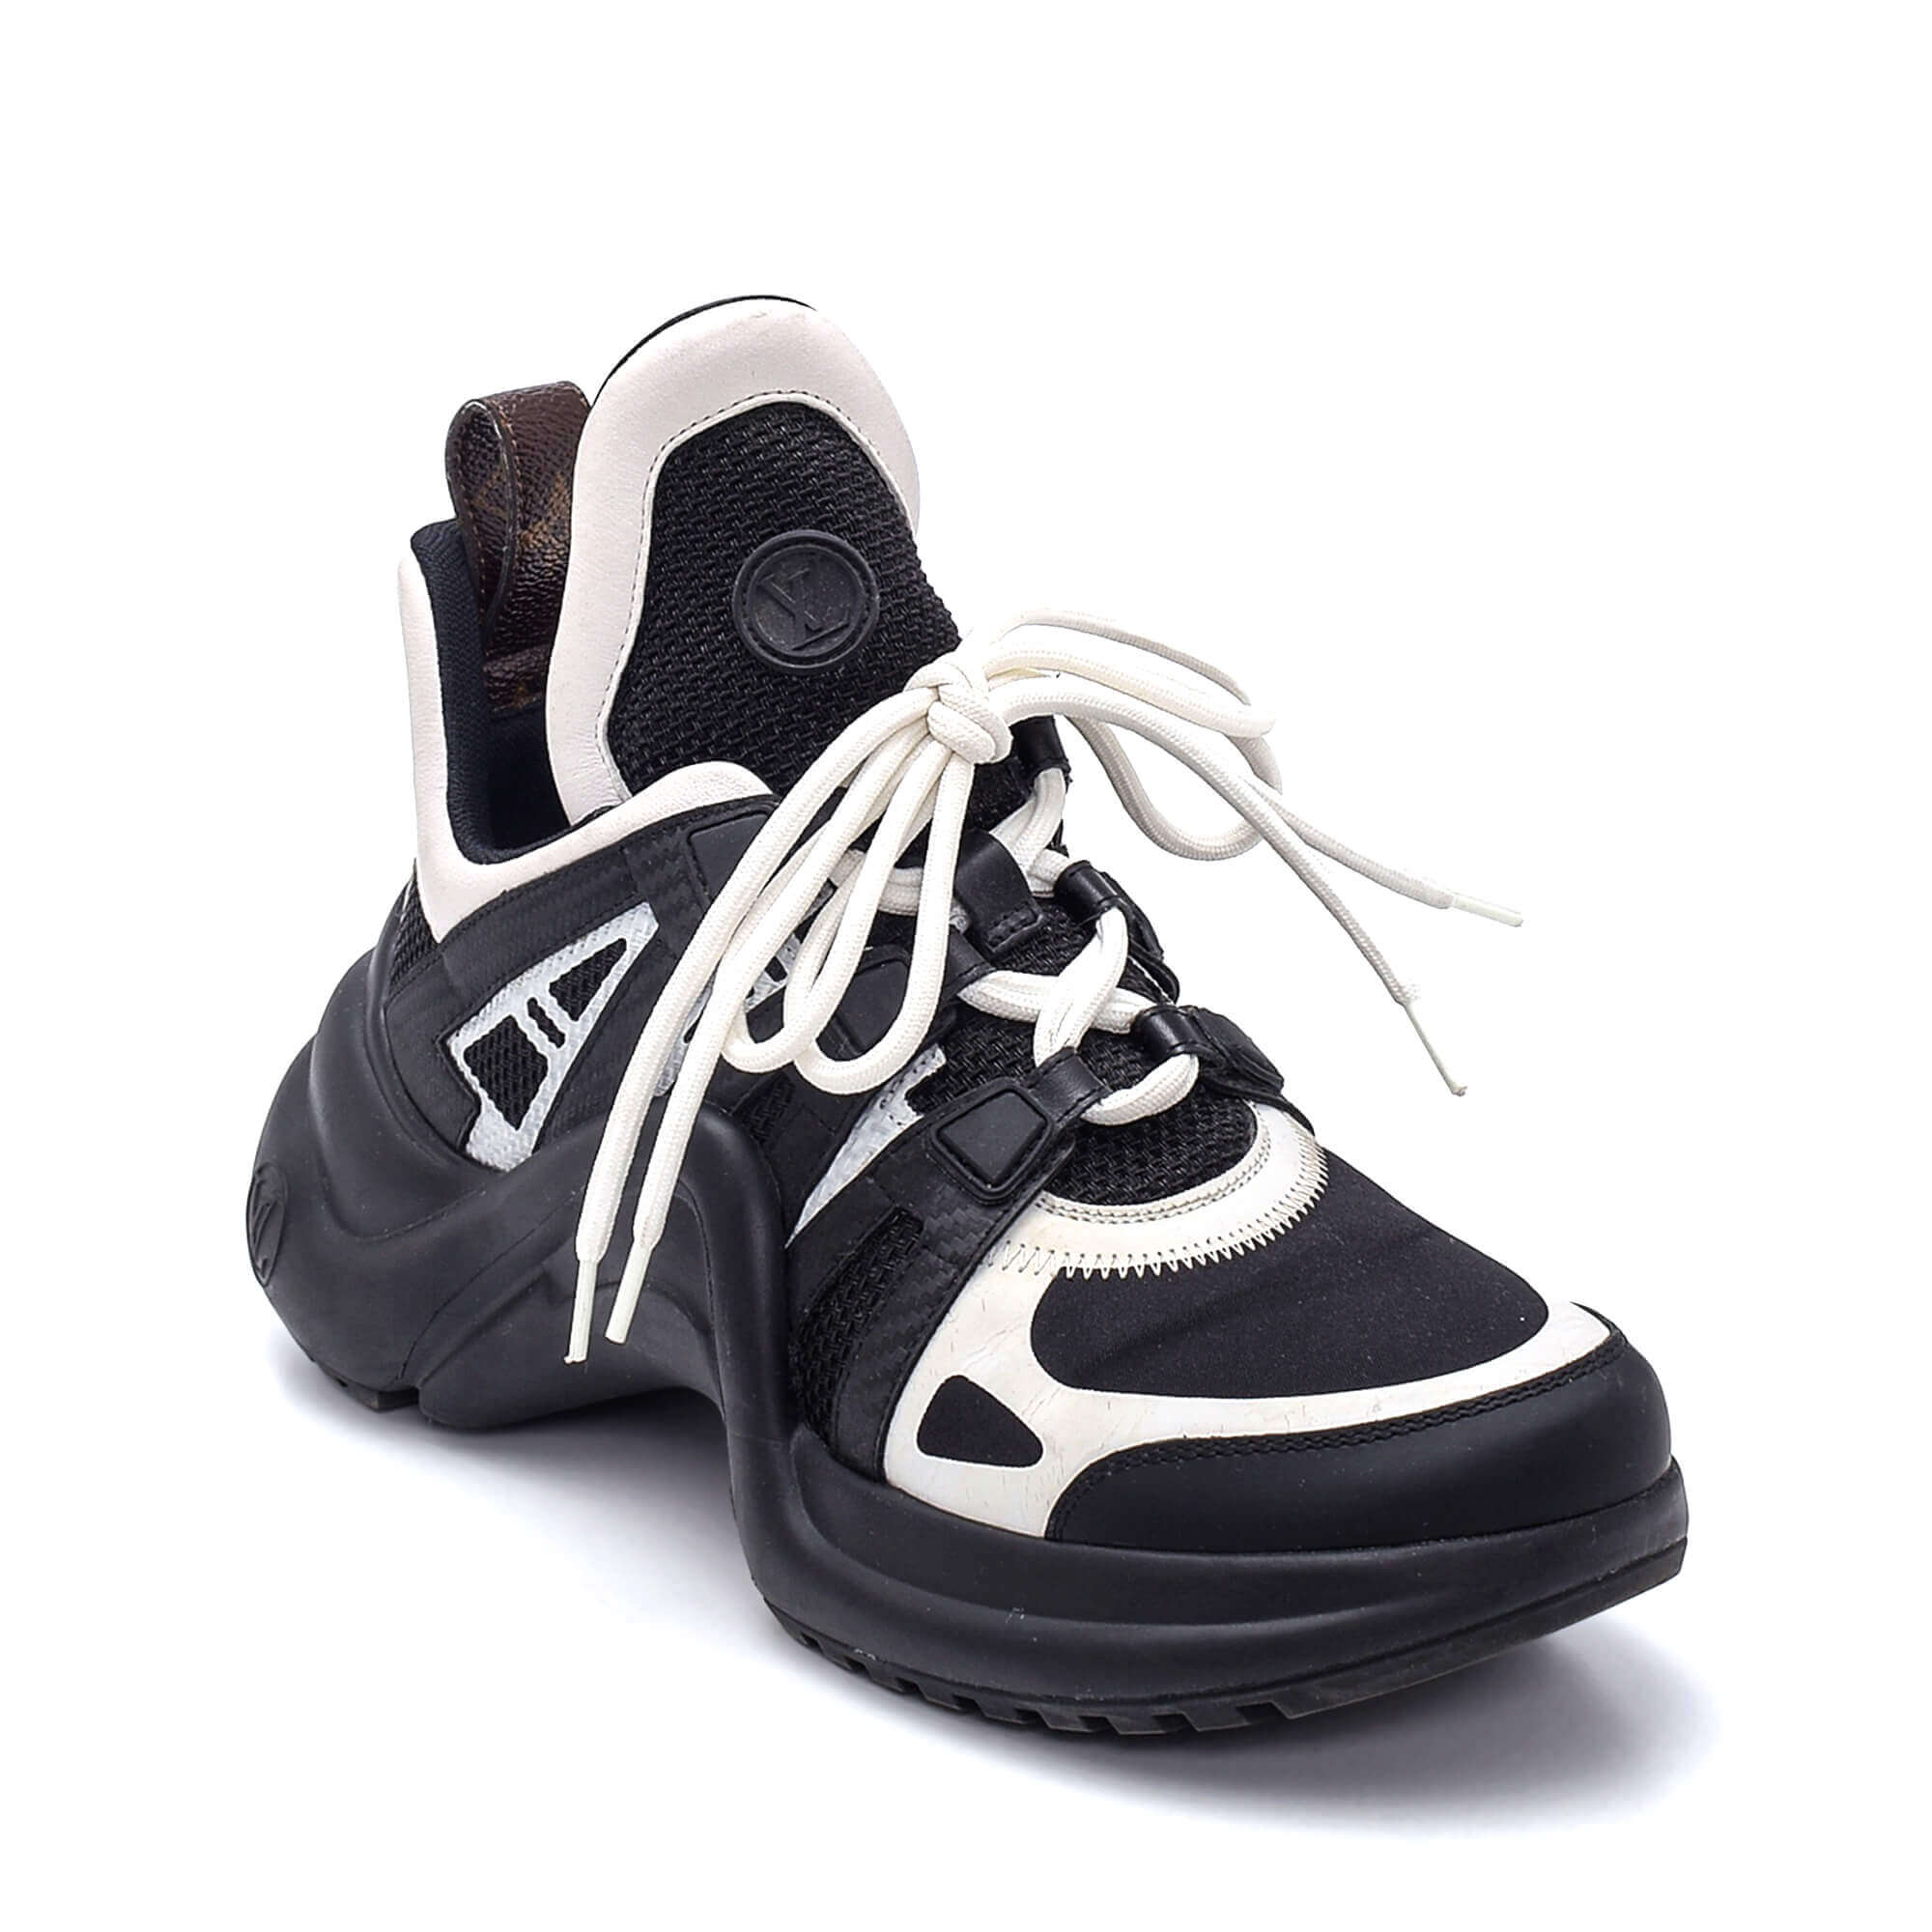 Louis Vuitton - Black & White Leather Fabric Archlight Sneakers